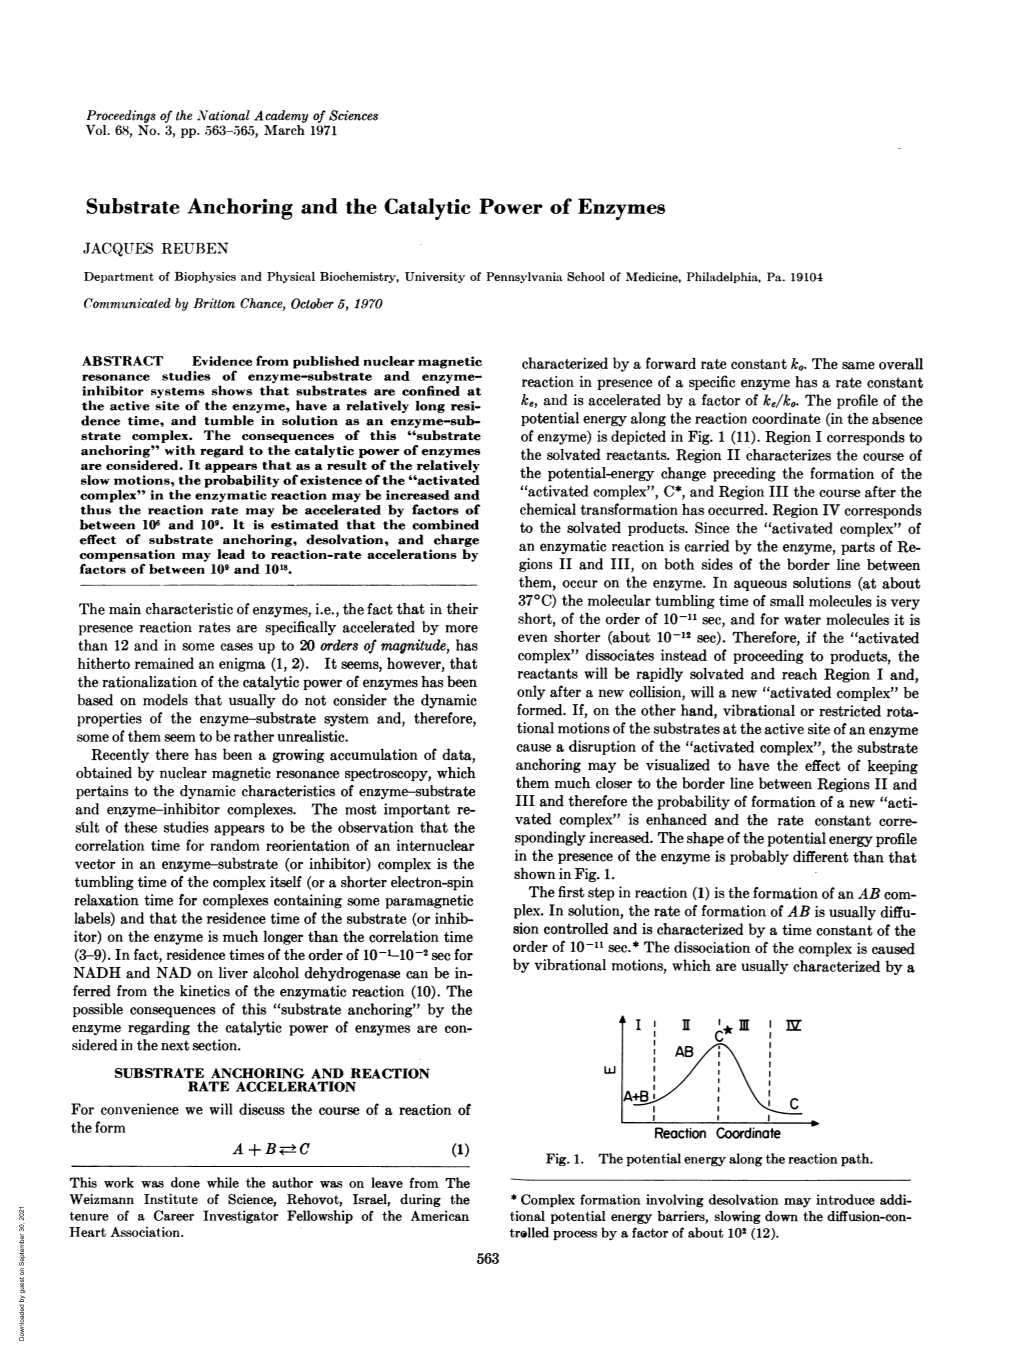 Substrate Anchoring and the Catalytic Power of Enzymes